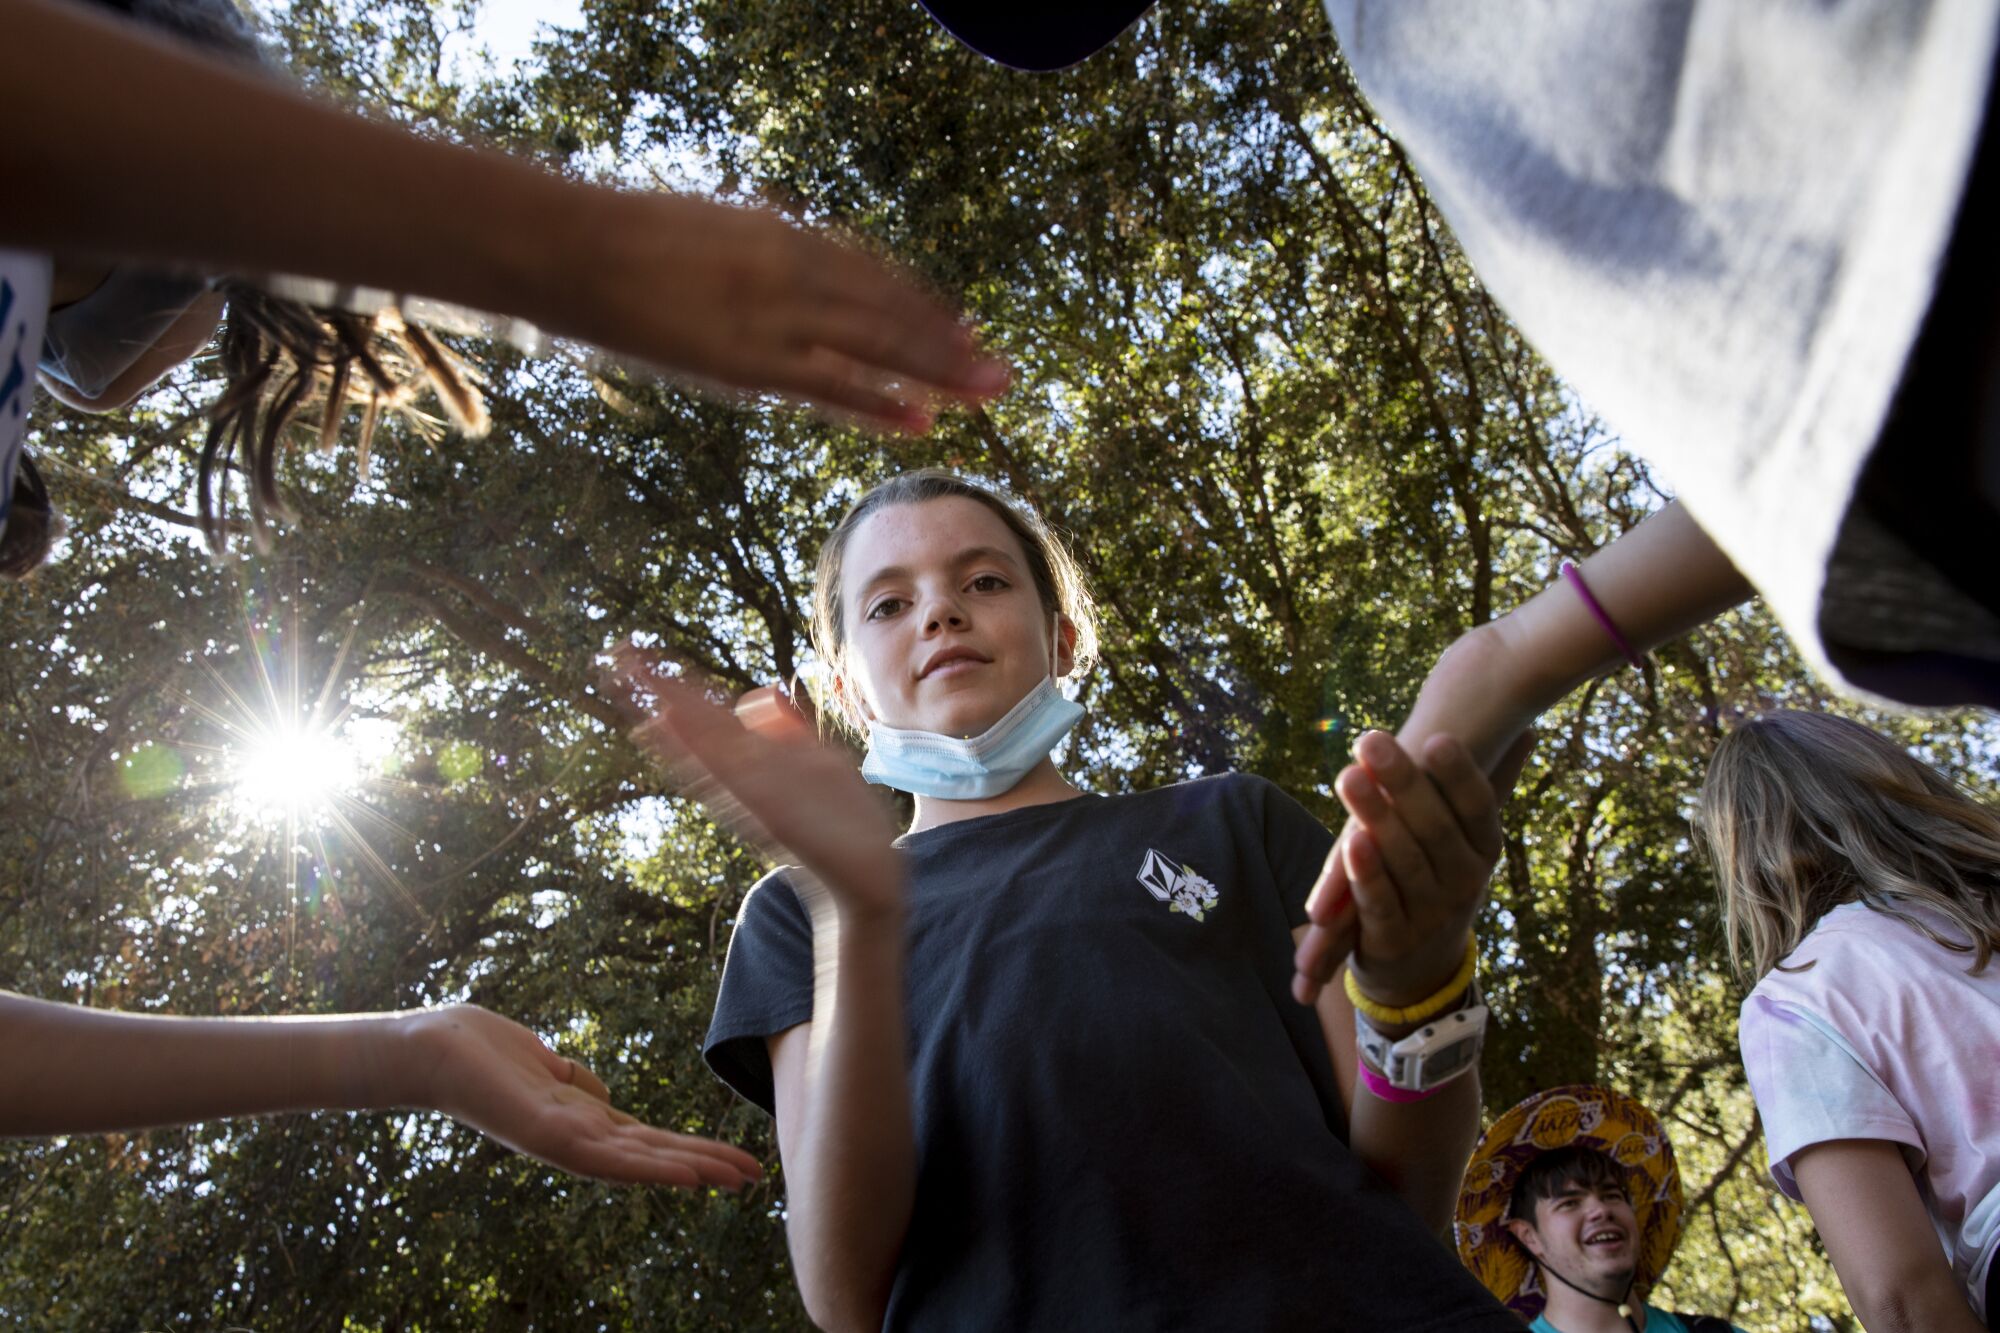 Sixth-graders Rachel Stein, left, Layla Smith and Taylor Duralde play a game called "Down by the banks" at  Camp Marston.